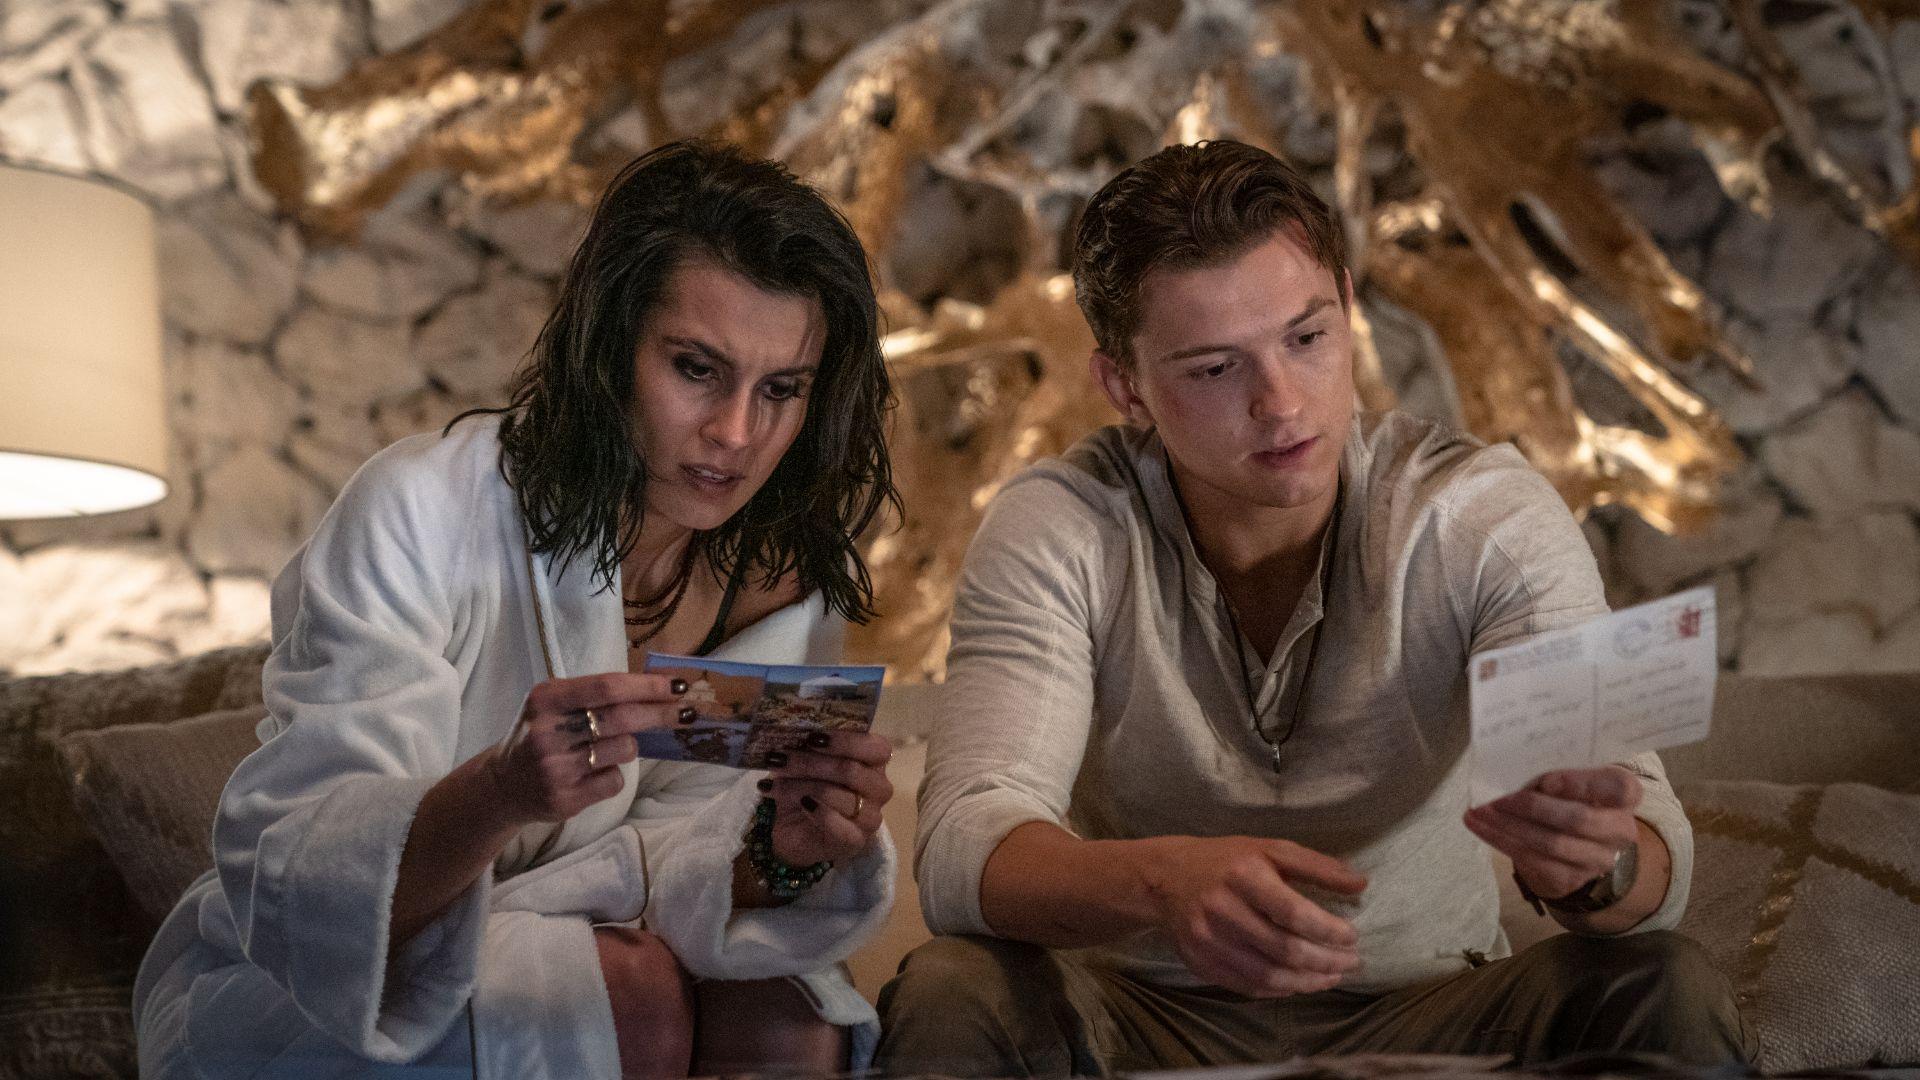 Uncharted (2022): Where to Watch and Stream Online